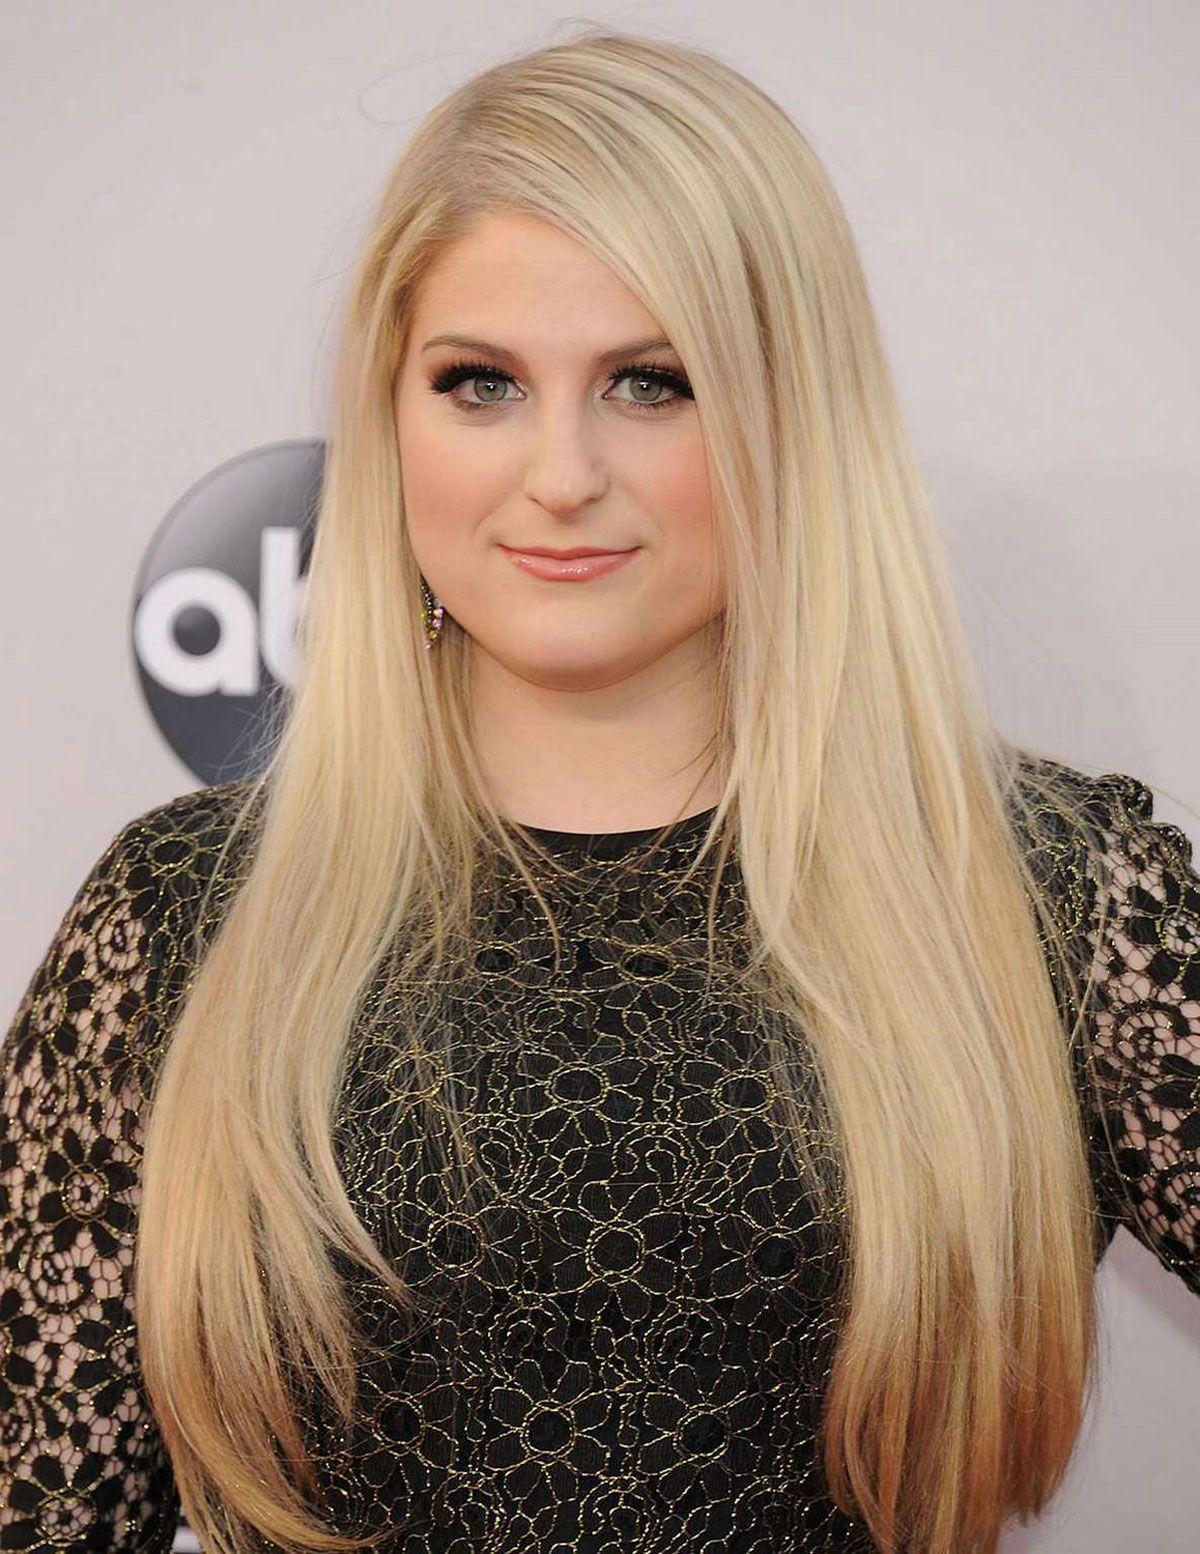 image about Meghan Trainor. , Red carpets